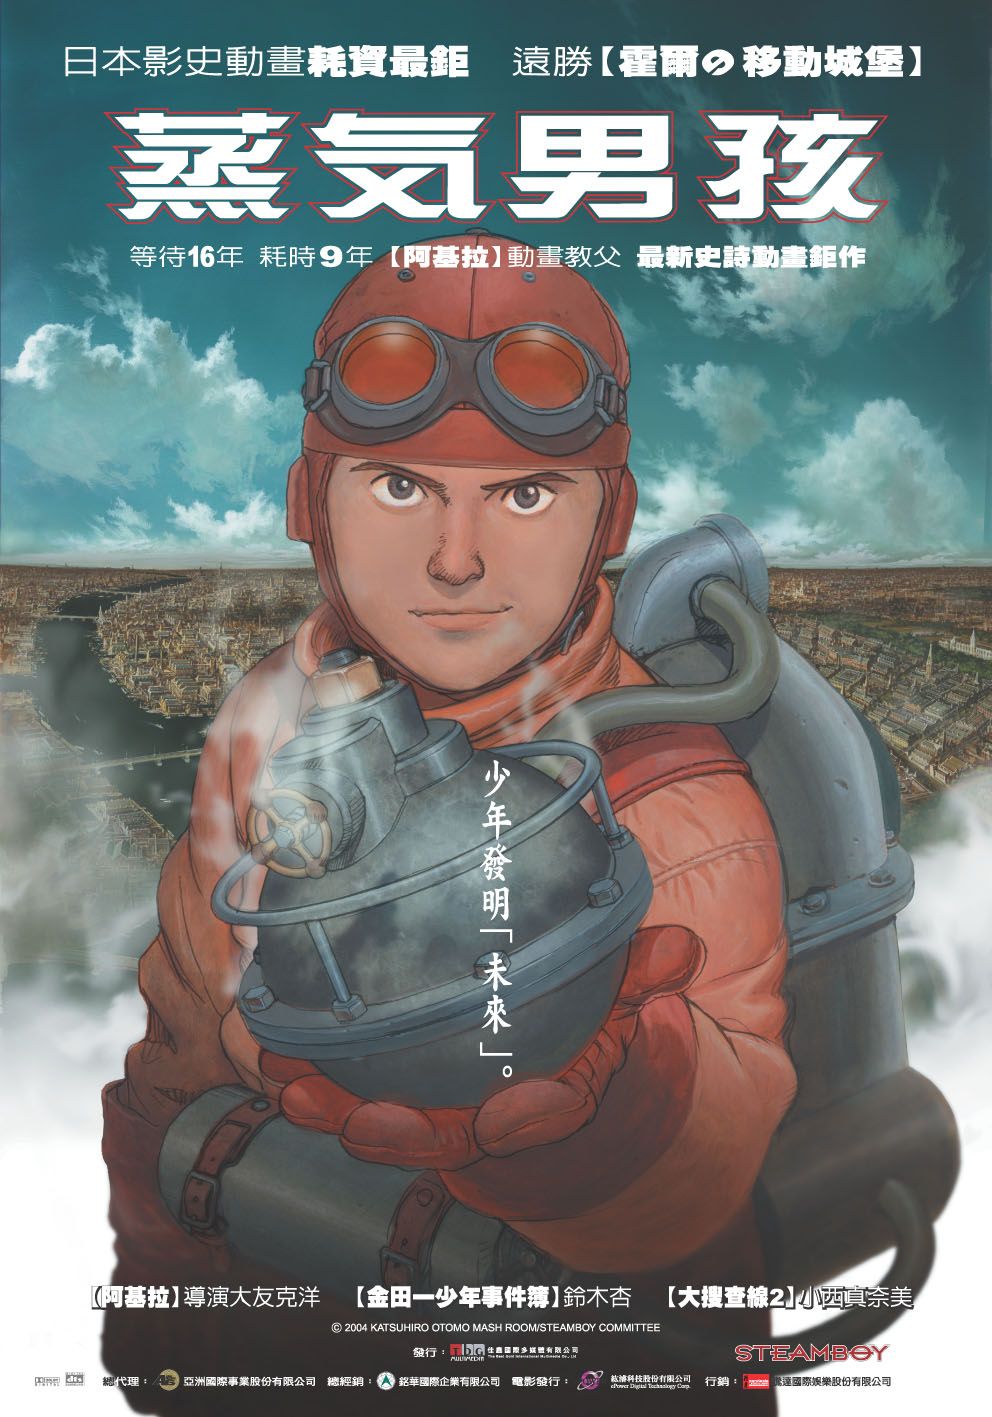 Extra Large Movie Poster Image for Steamboy (#2 of 2)